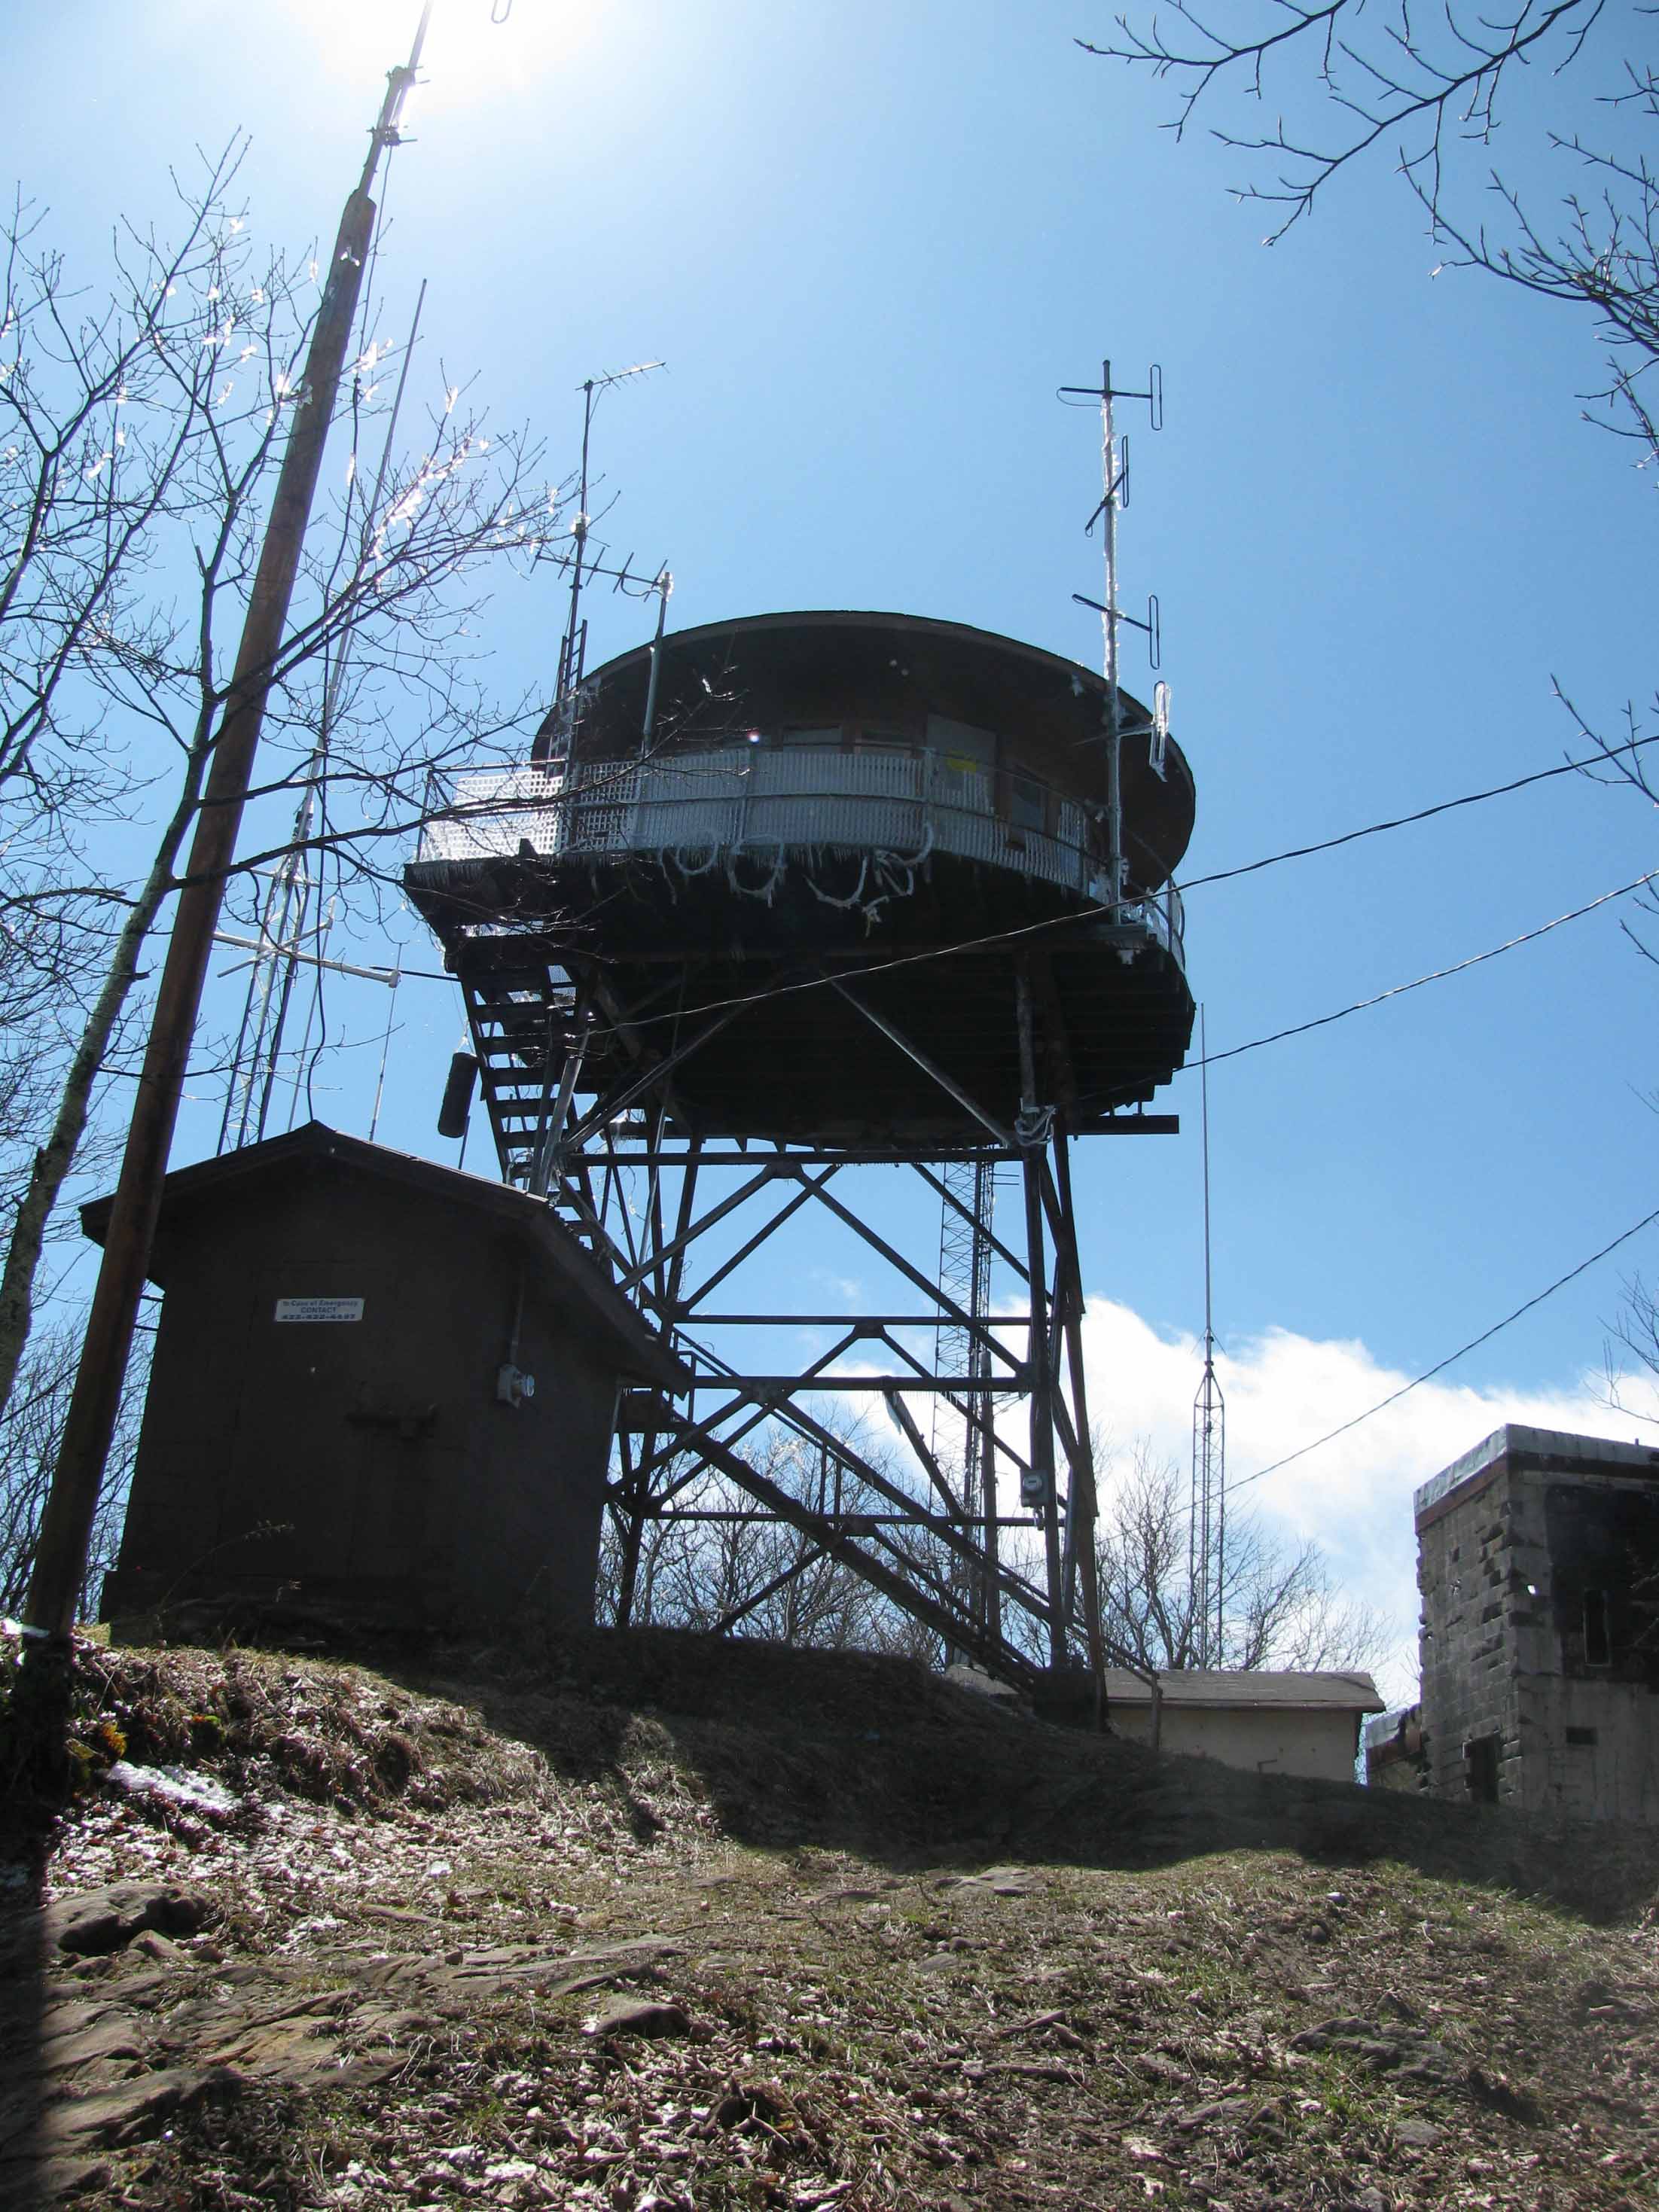 mm 14.1 Approaching the Camp Creek Bald Fire Tower from the lower parking area.  Courtesy commissar67@gmail.com